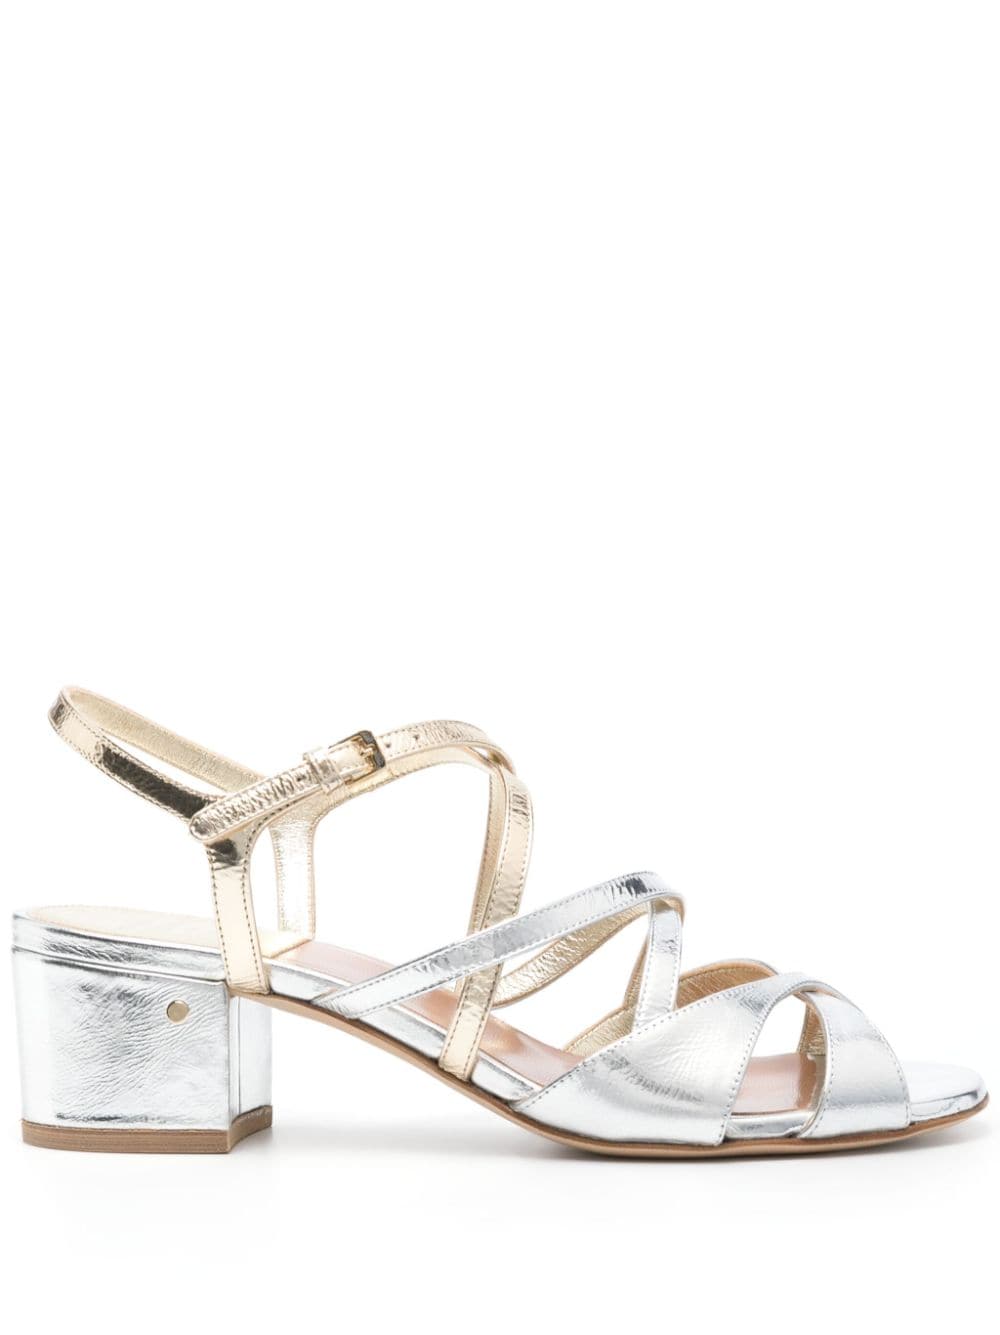 Janet 55mm leather sandals